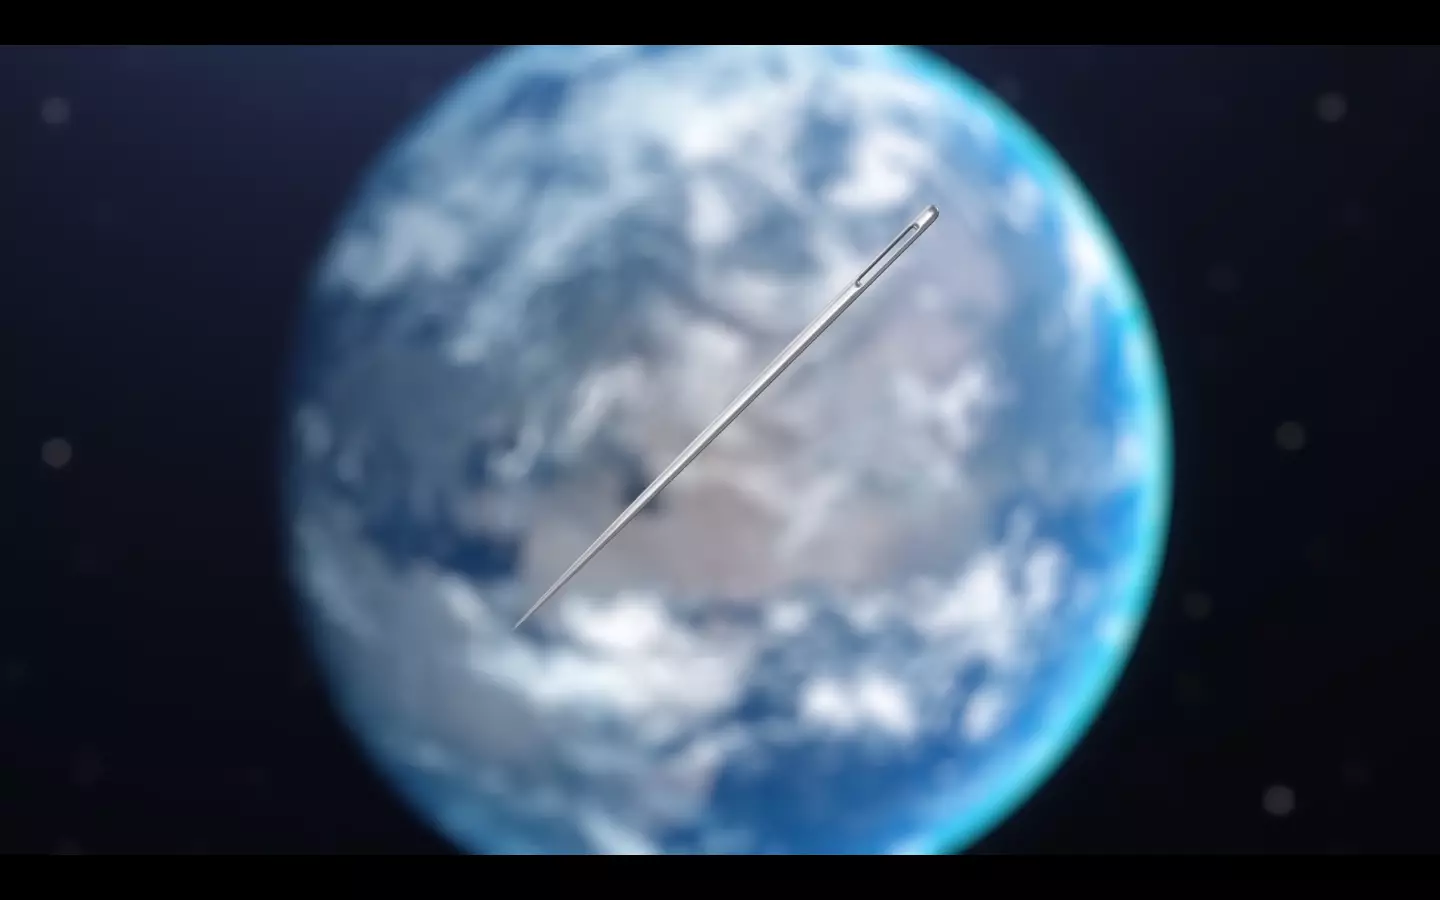 A needle could moving at the speed of light could be very dangerous (Youtube/Ridddle)